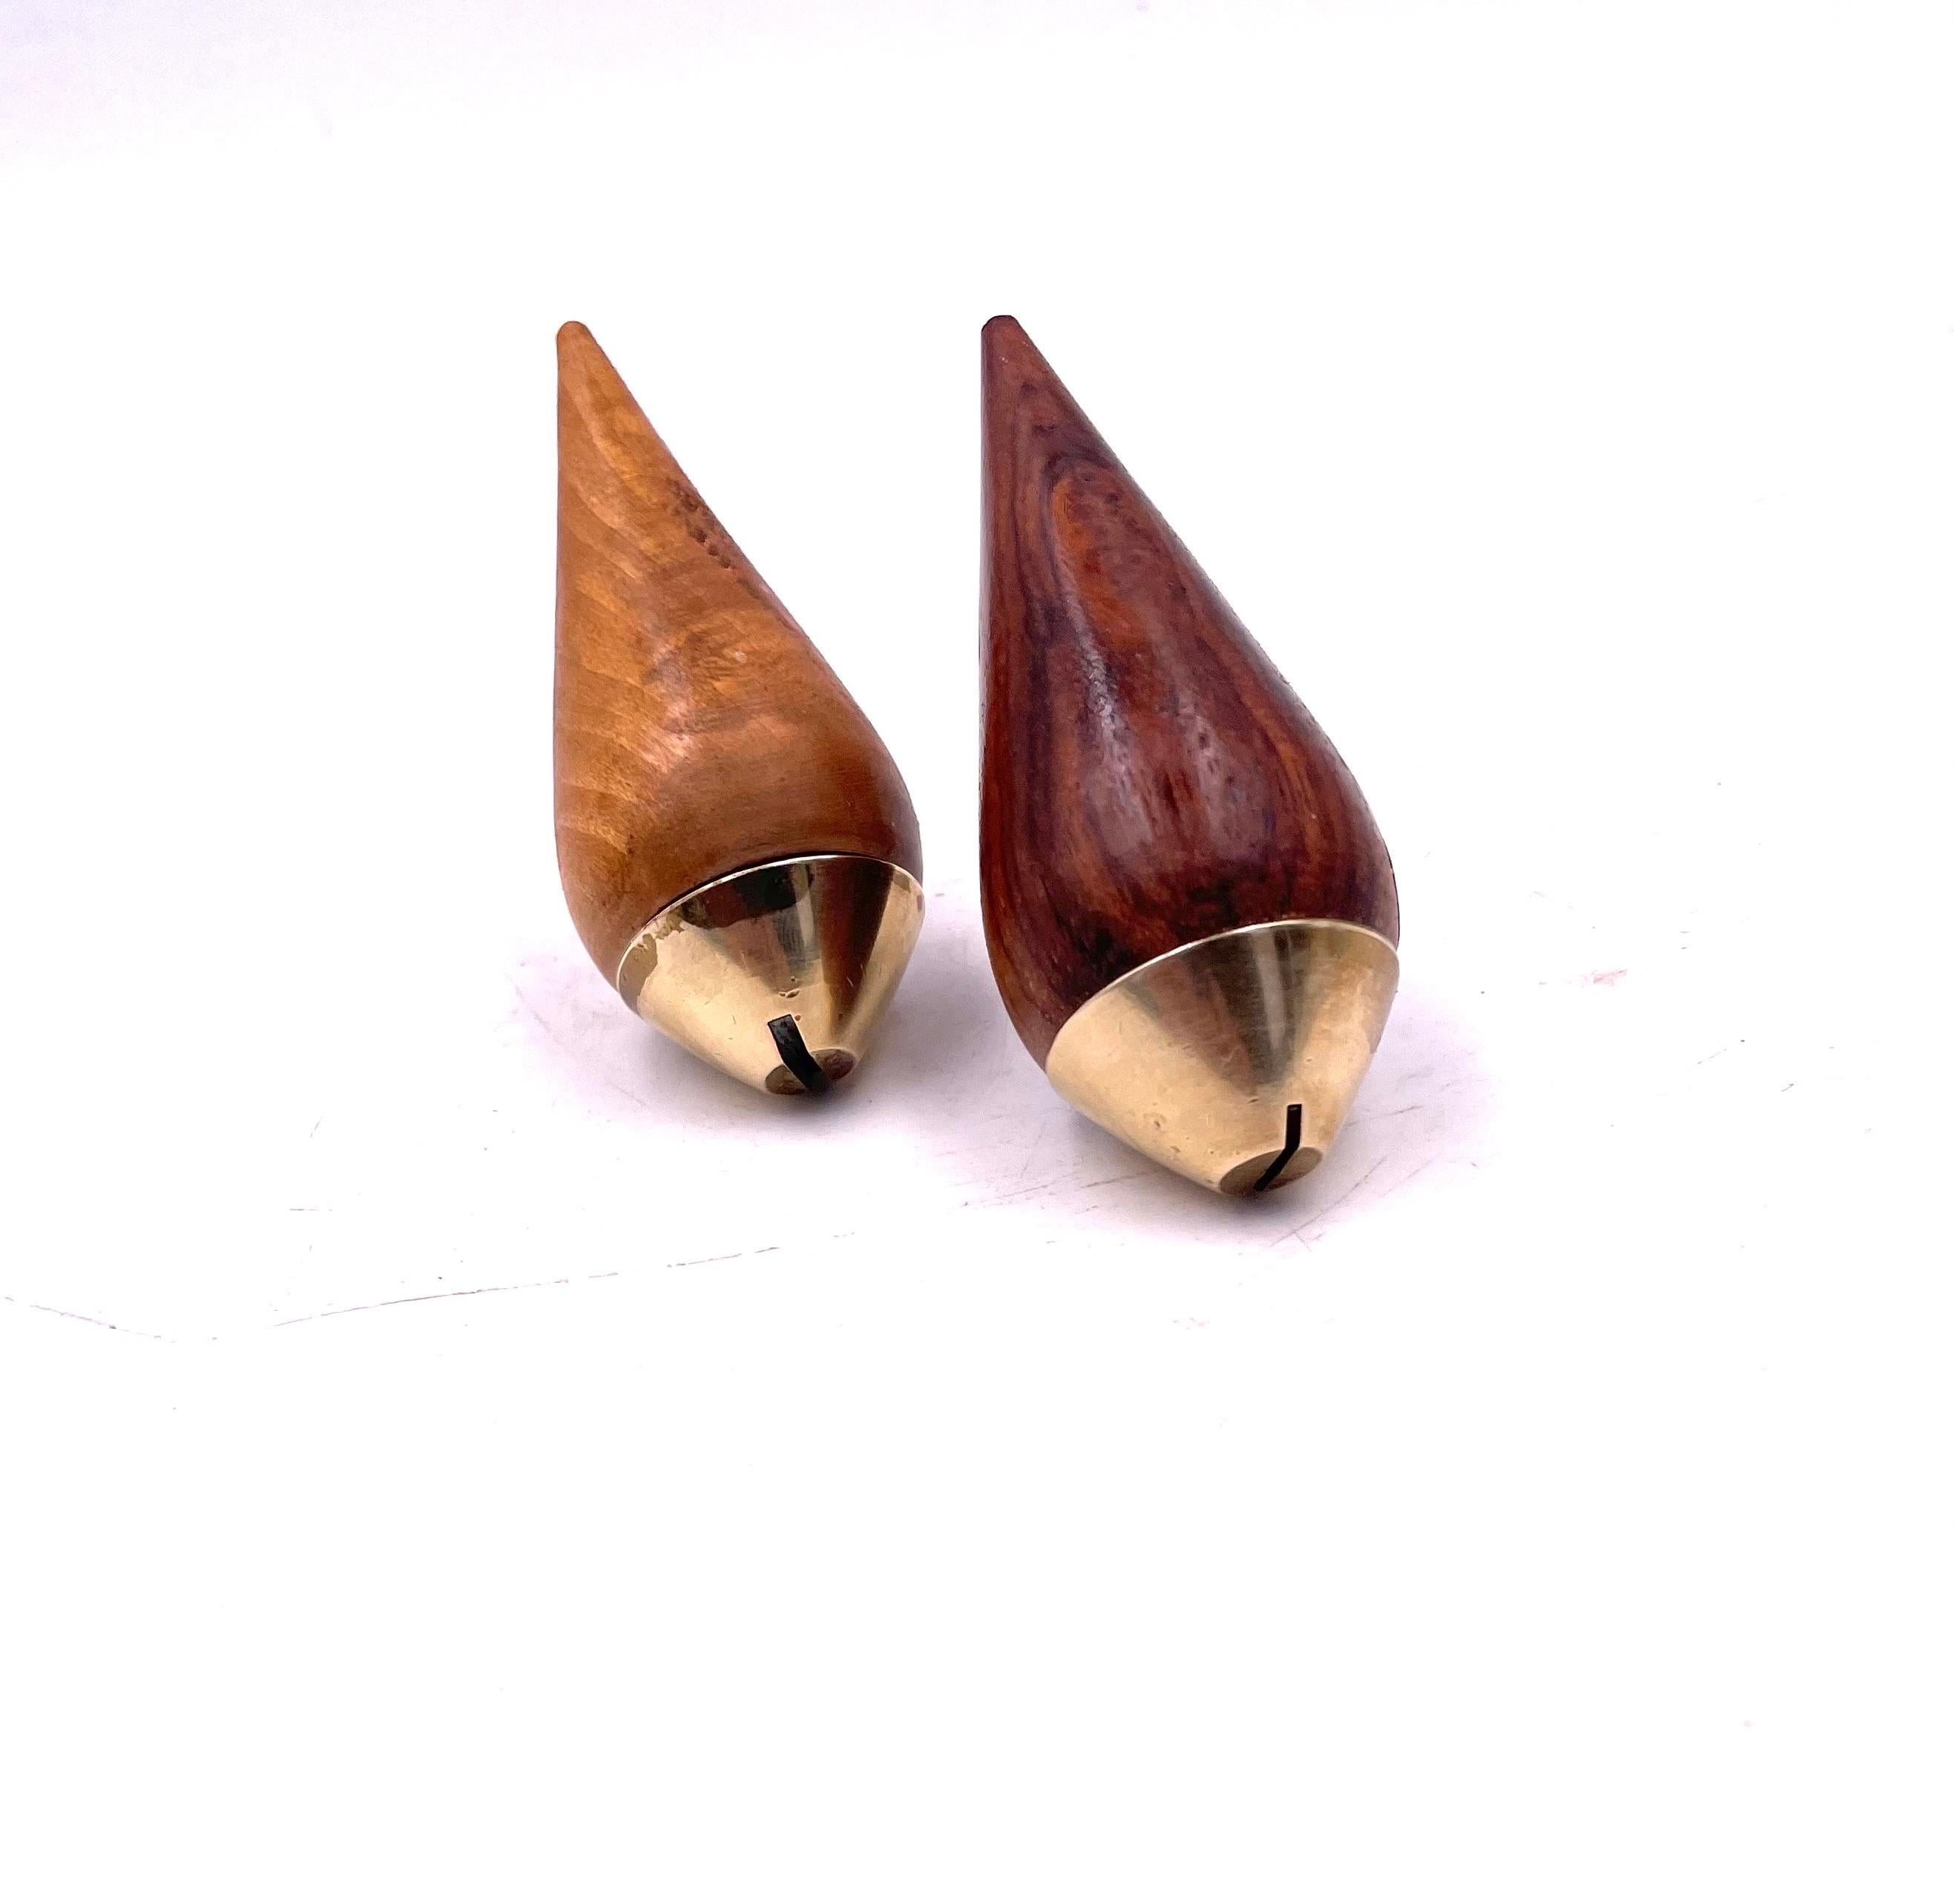 20th Century Danish Modern Rare Pair of Salt & Pepper Shakers in Rosewood & Brass For Sale